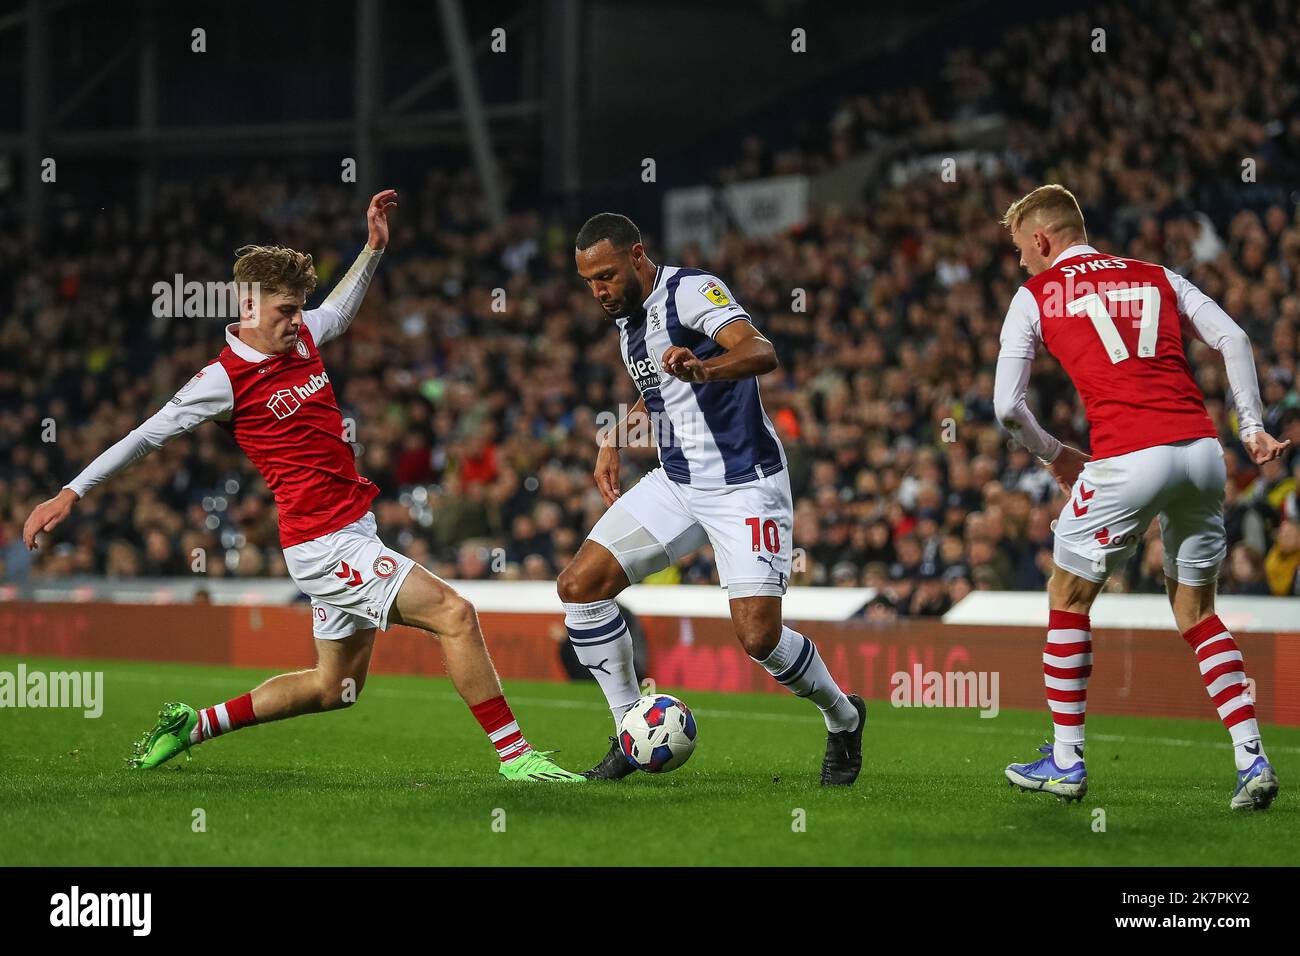 Alex Scott #7 of Bristol City tackles Matt Phillips #10 of West Bromwich Albion during the Sky Bet Championship match West Bromwich Albion vs Bristol City at The Hawthorns, West Bromwich, United Kingdom, 18th October 2022  (Photo by Gareth Evans/News Images) Stock Photo